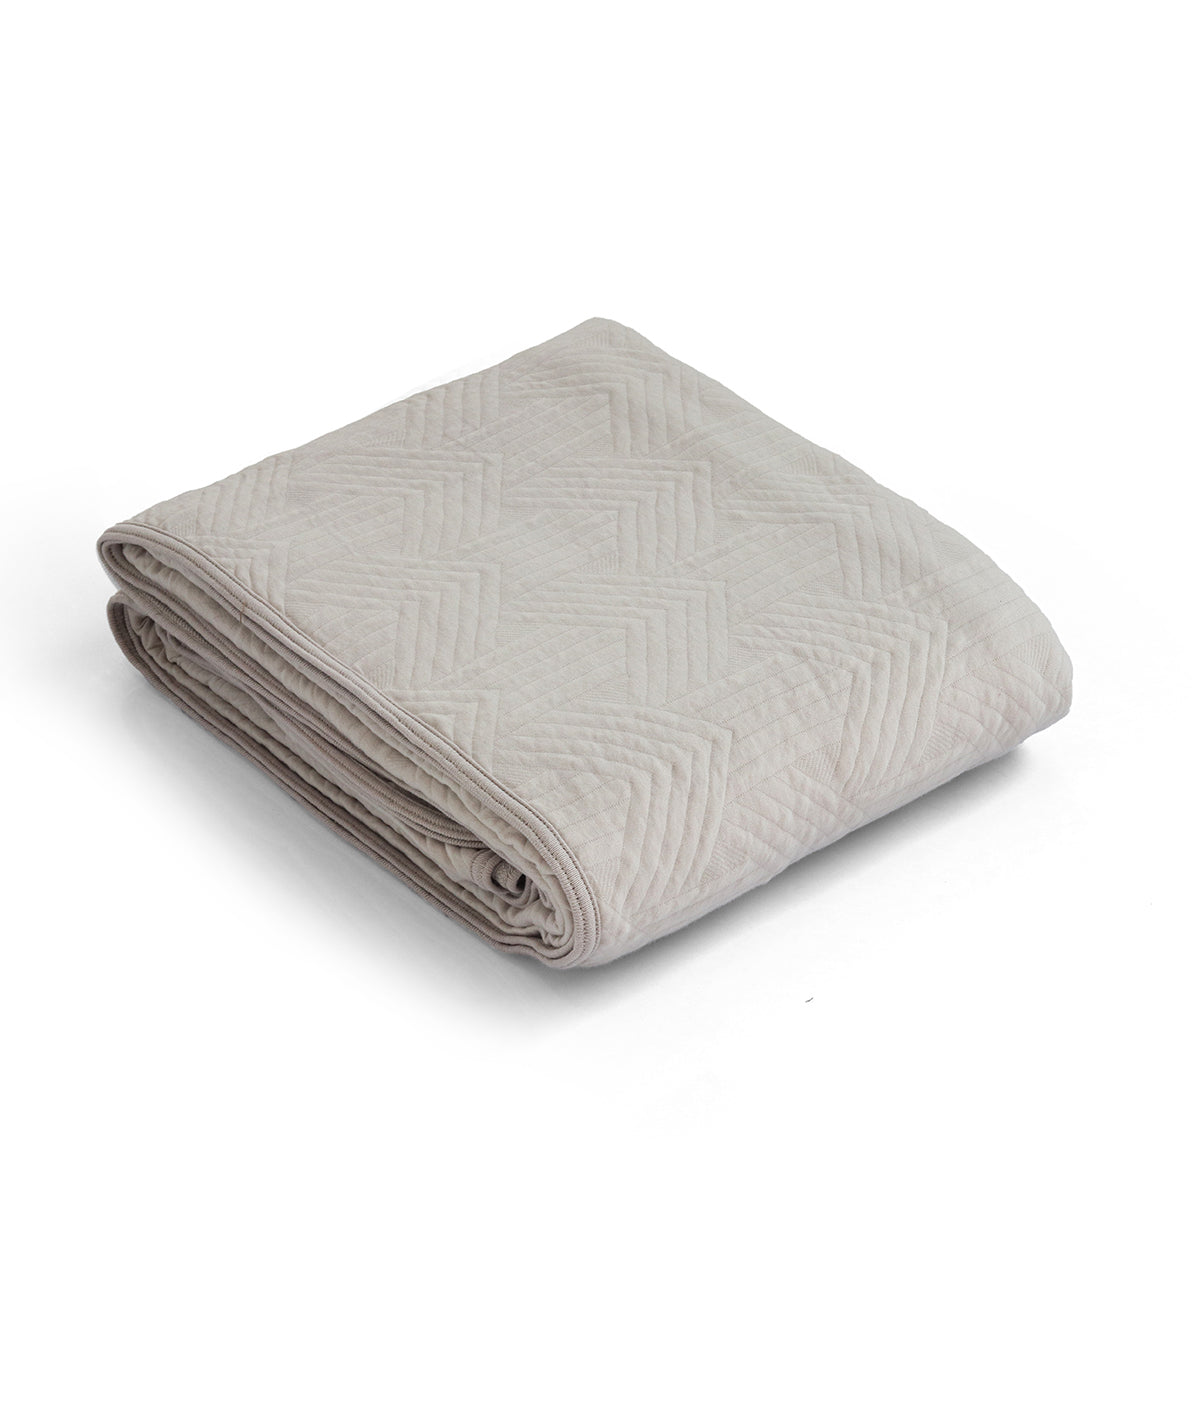 Parquet Cotton Knitted Single Bed Dohar / Quilt (Silver Cloud)